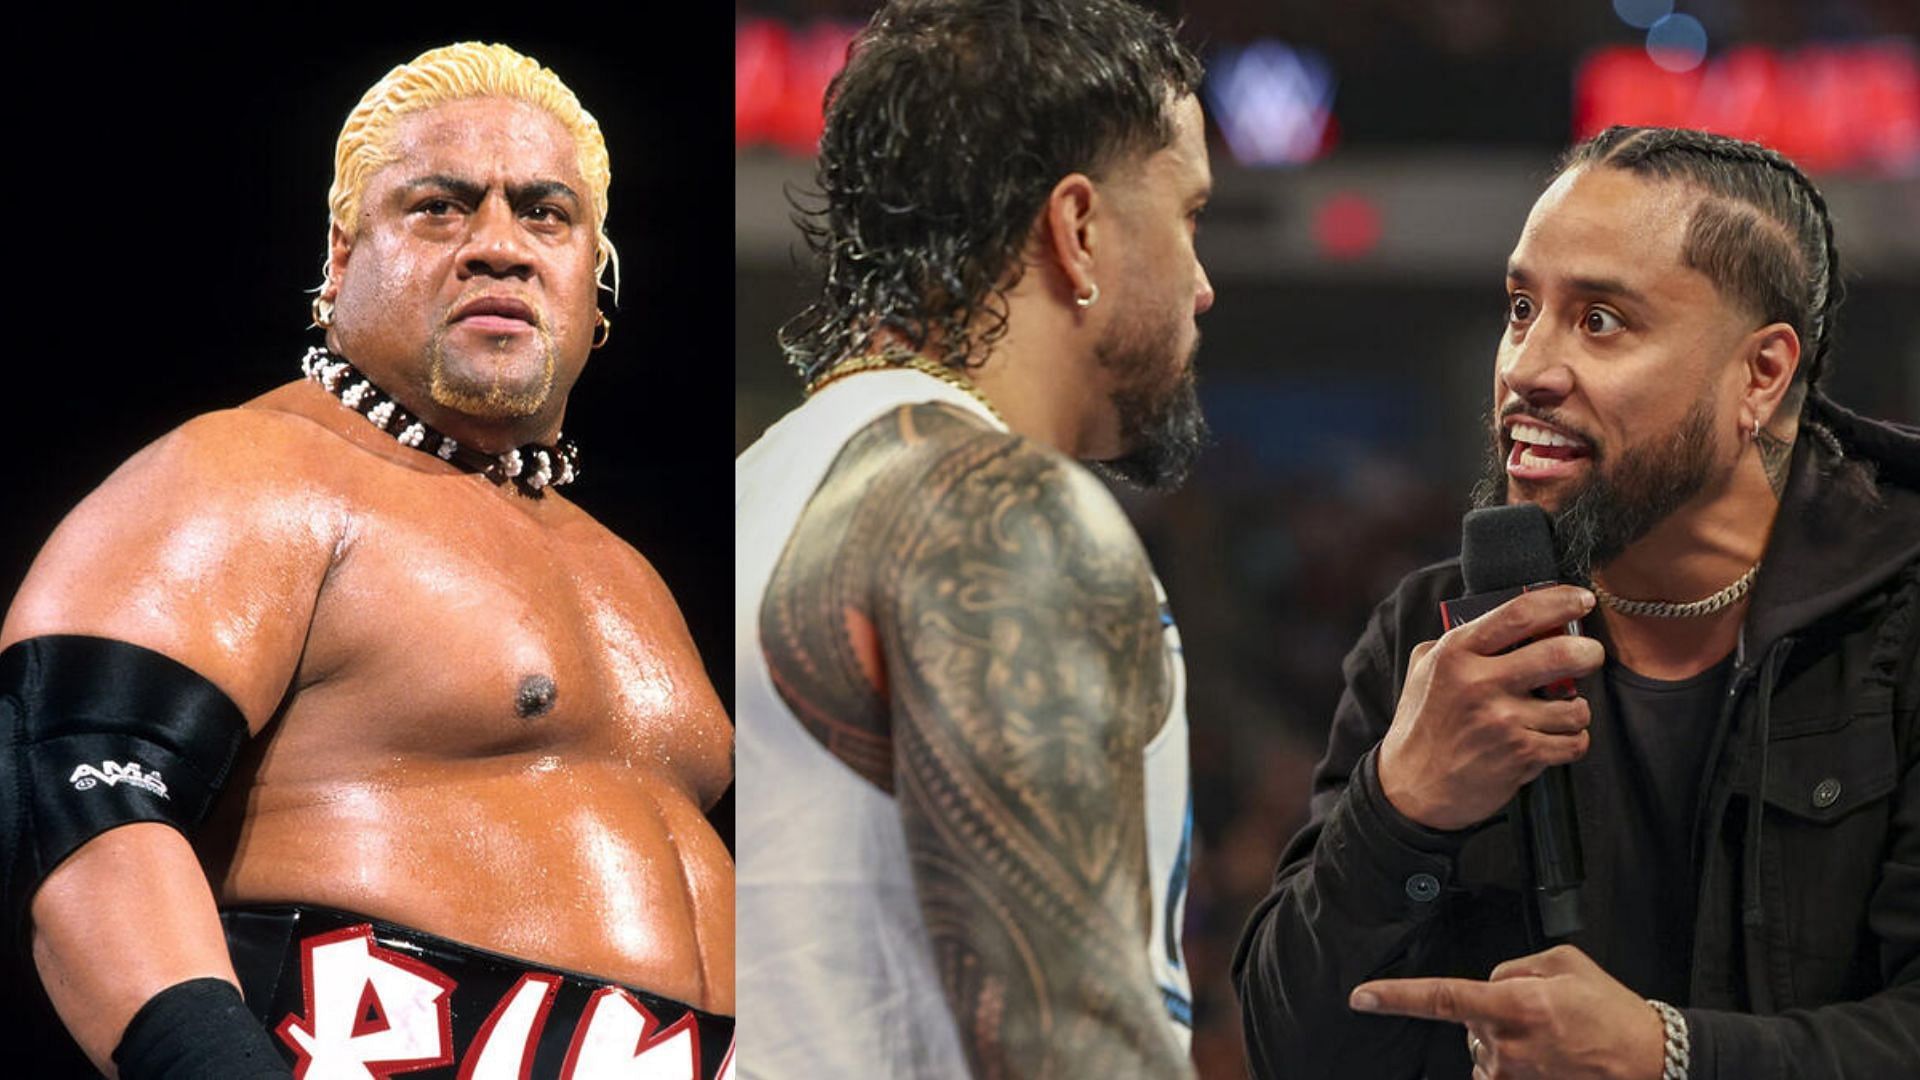 Rikishi is excited for the battle of The Usos.